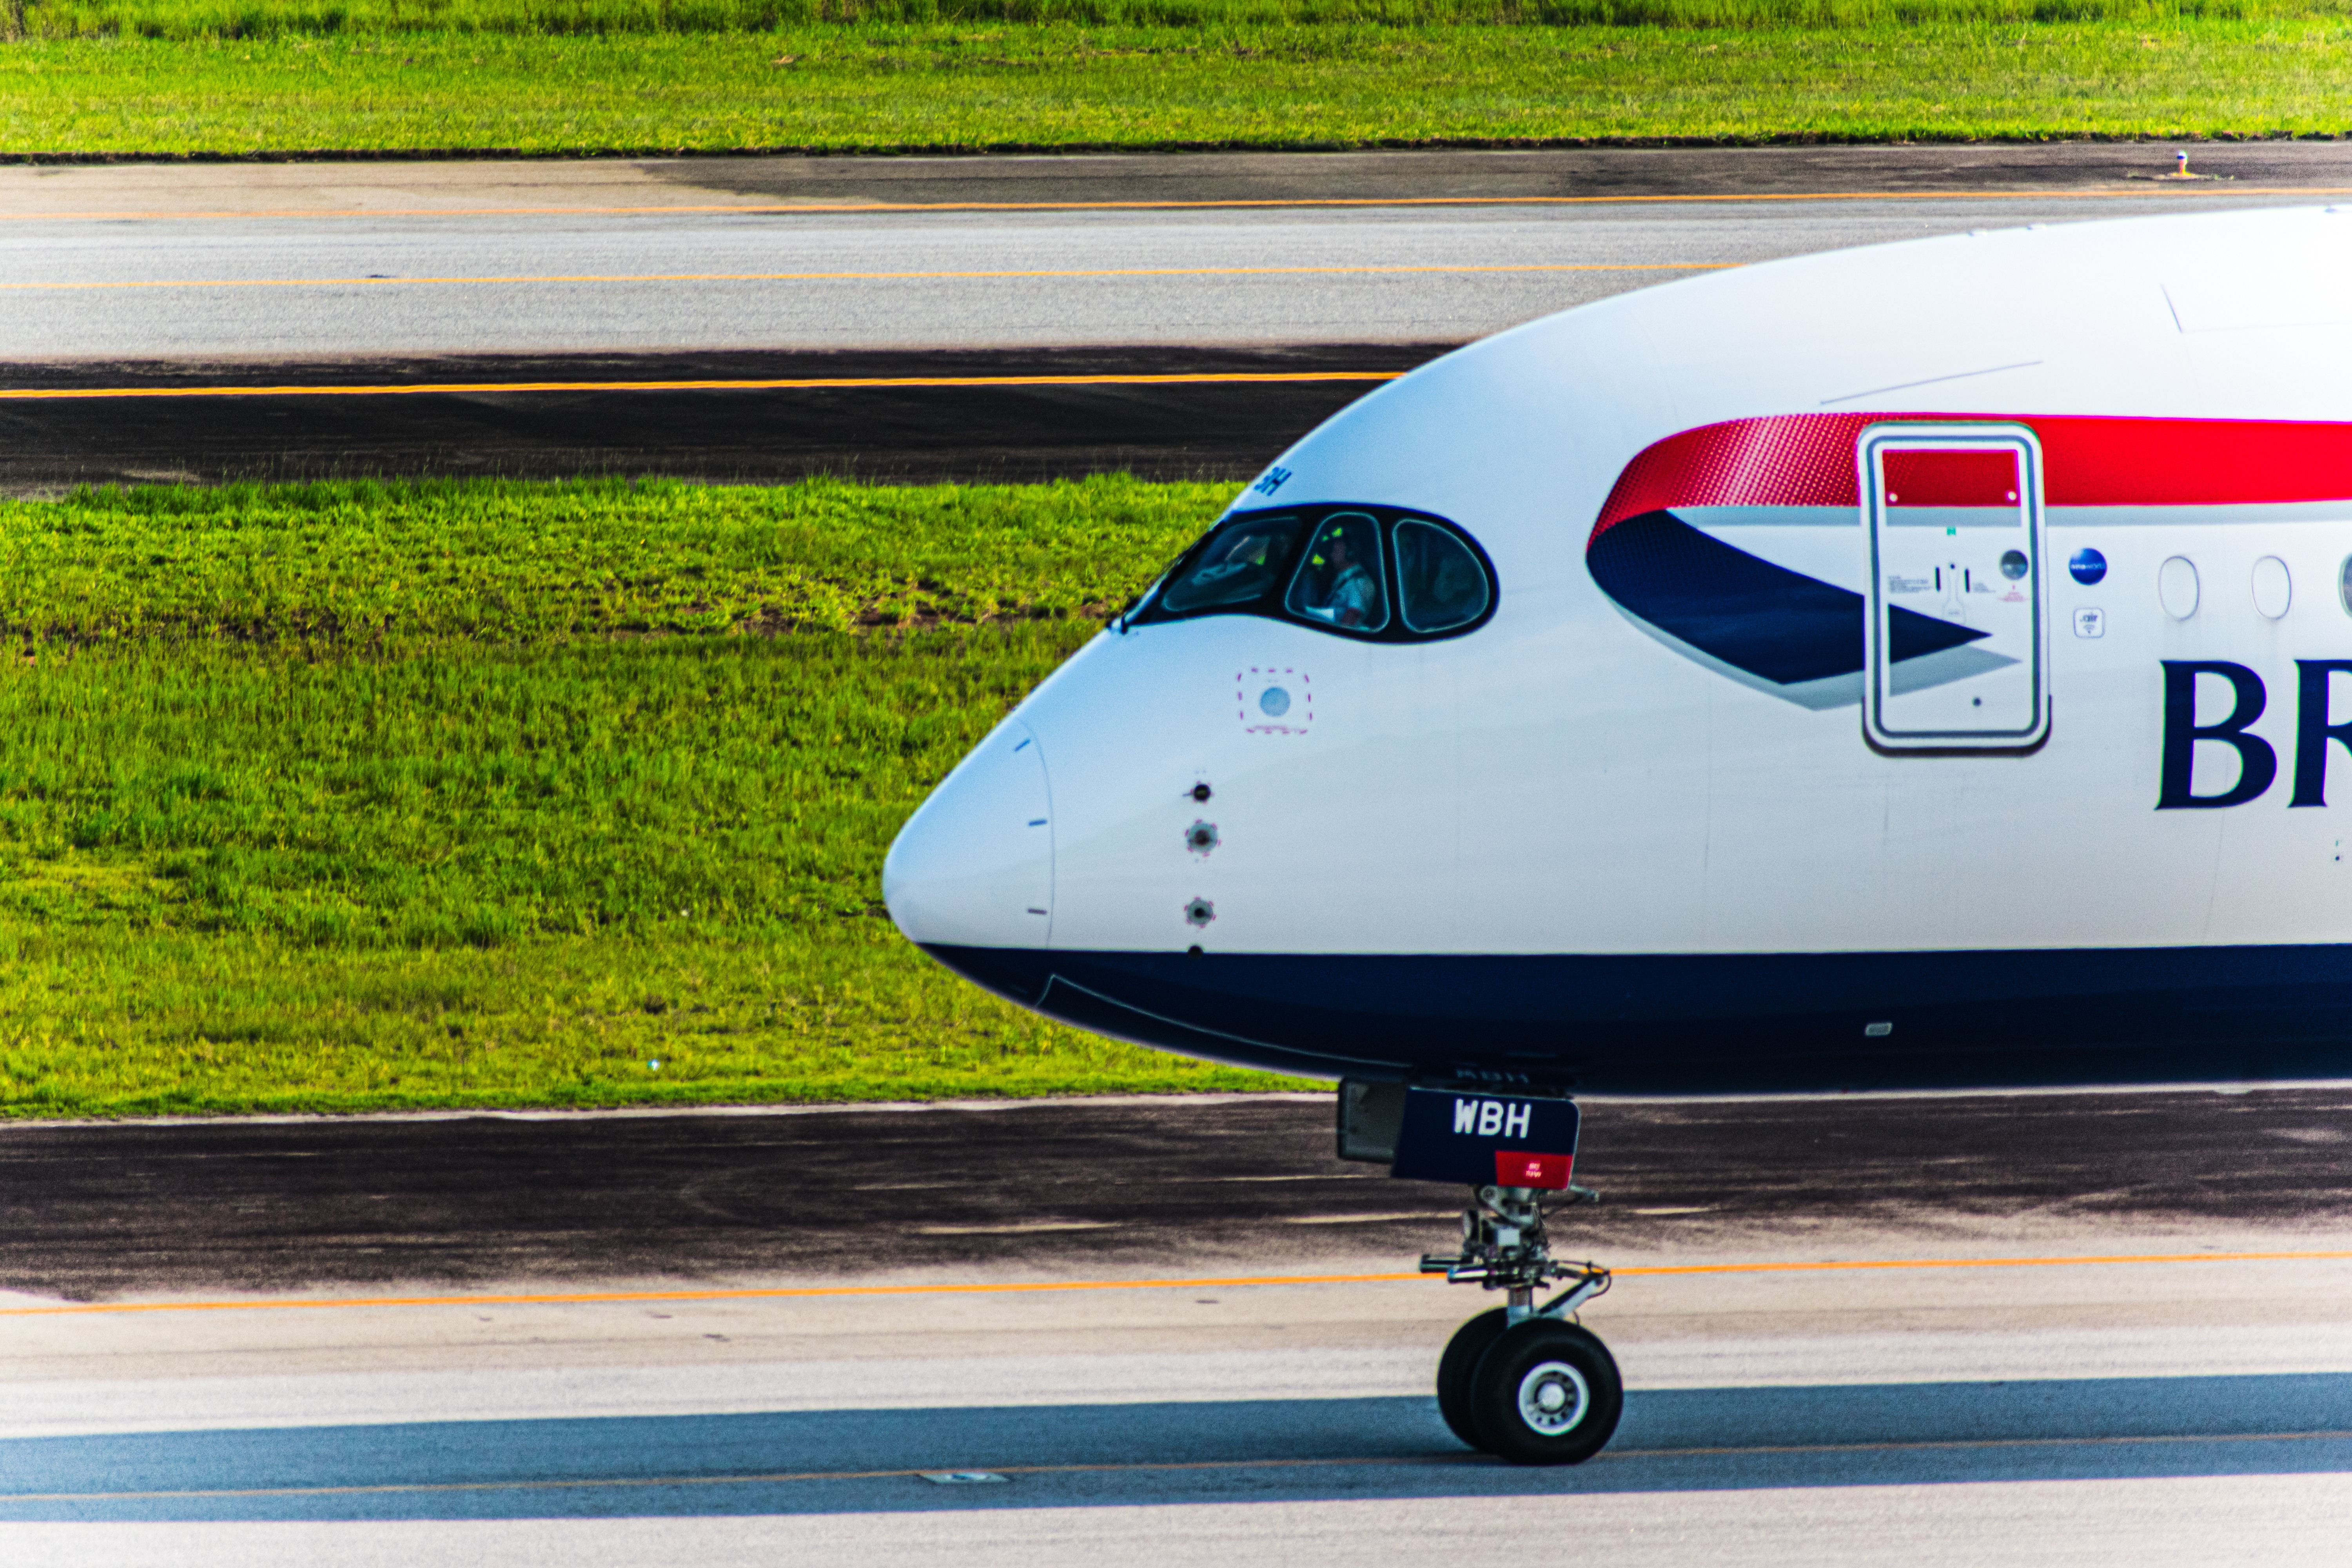 British Airways Airbus A350-1000 taxiing for takeoff at GRU